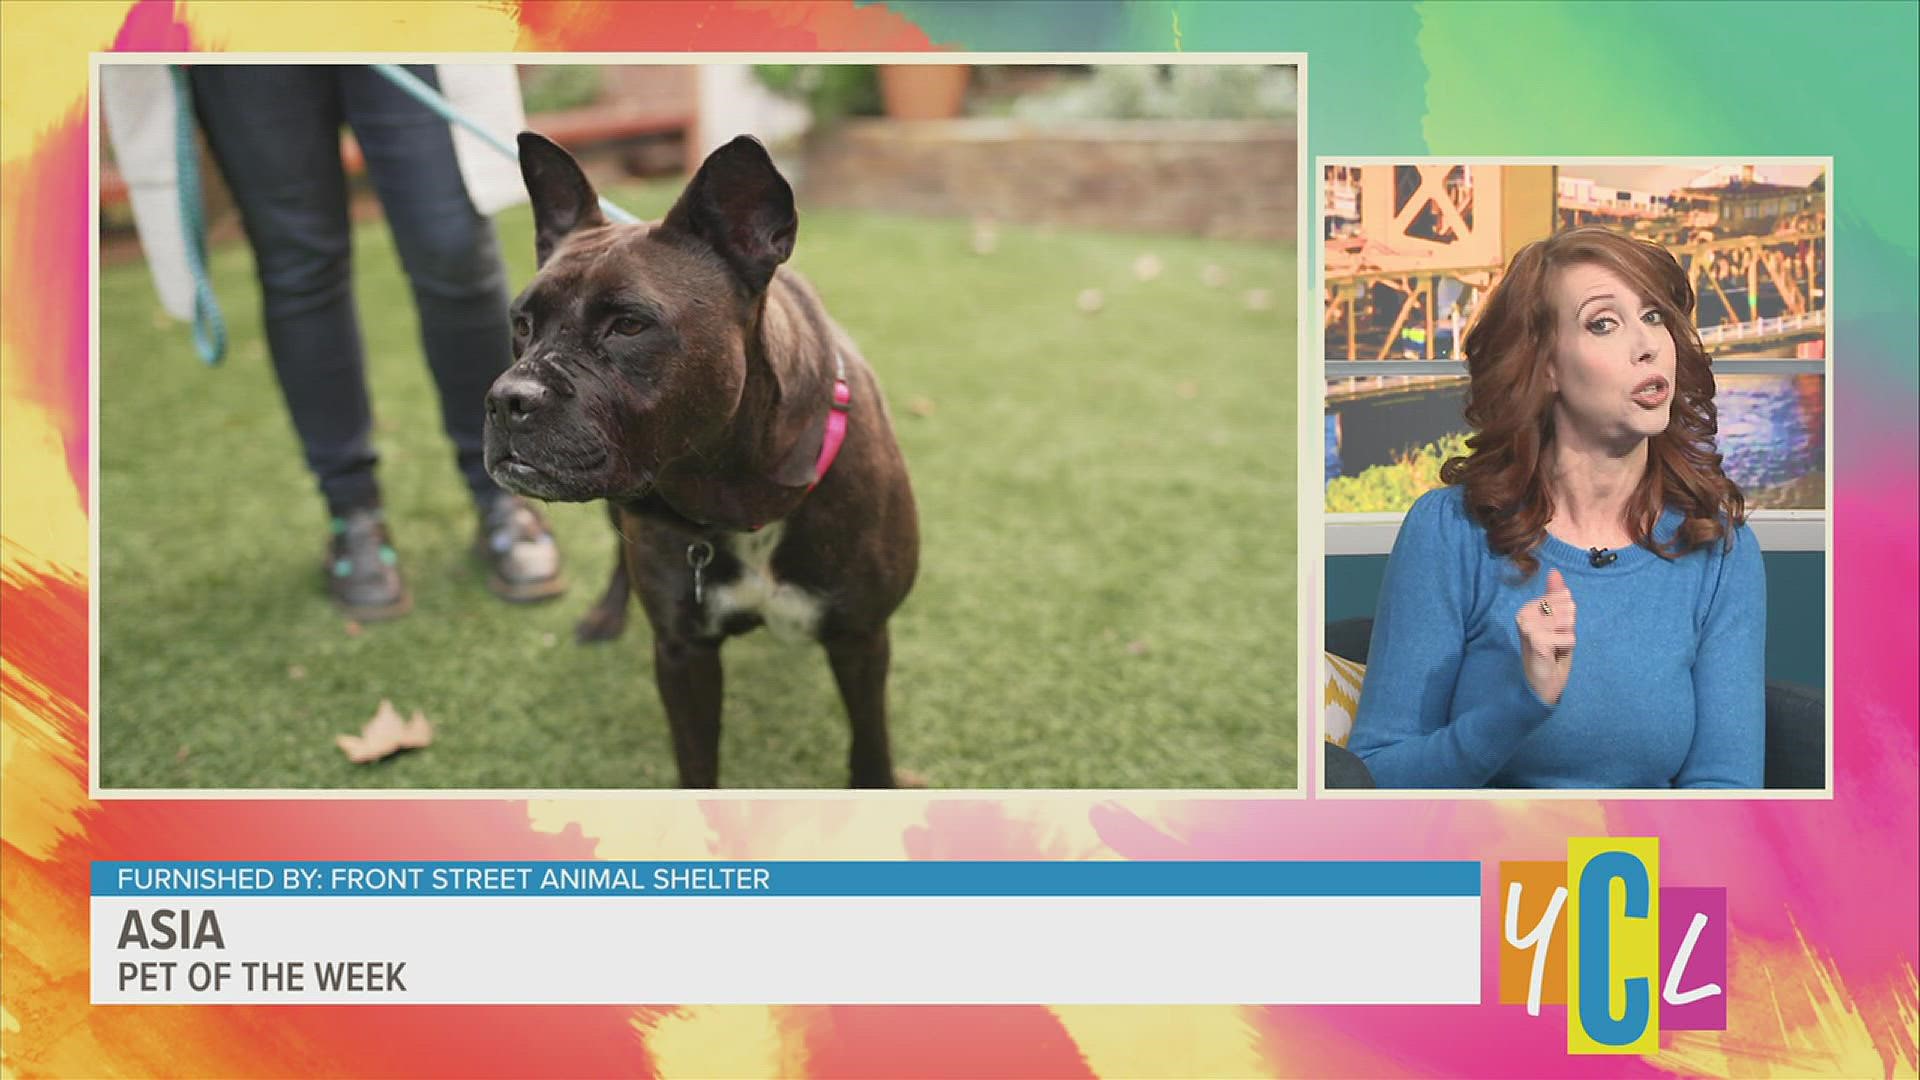 Say hello to this 2 year old pit mix! Come meet Asia at the Front Street Animal Shelter or visit frontstreetshelter.org for more information.